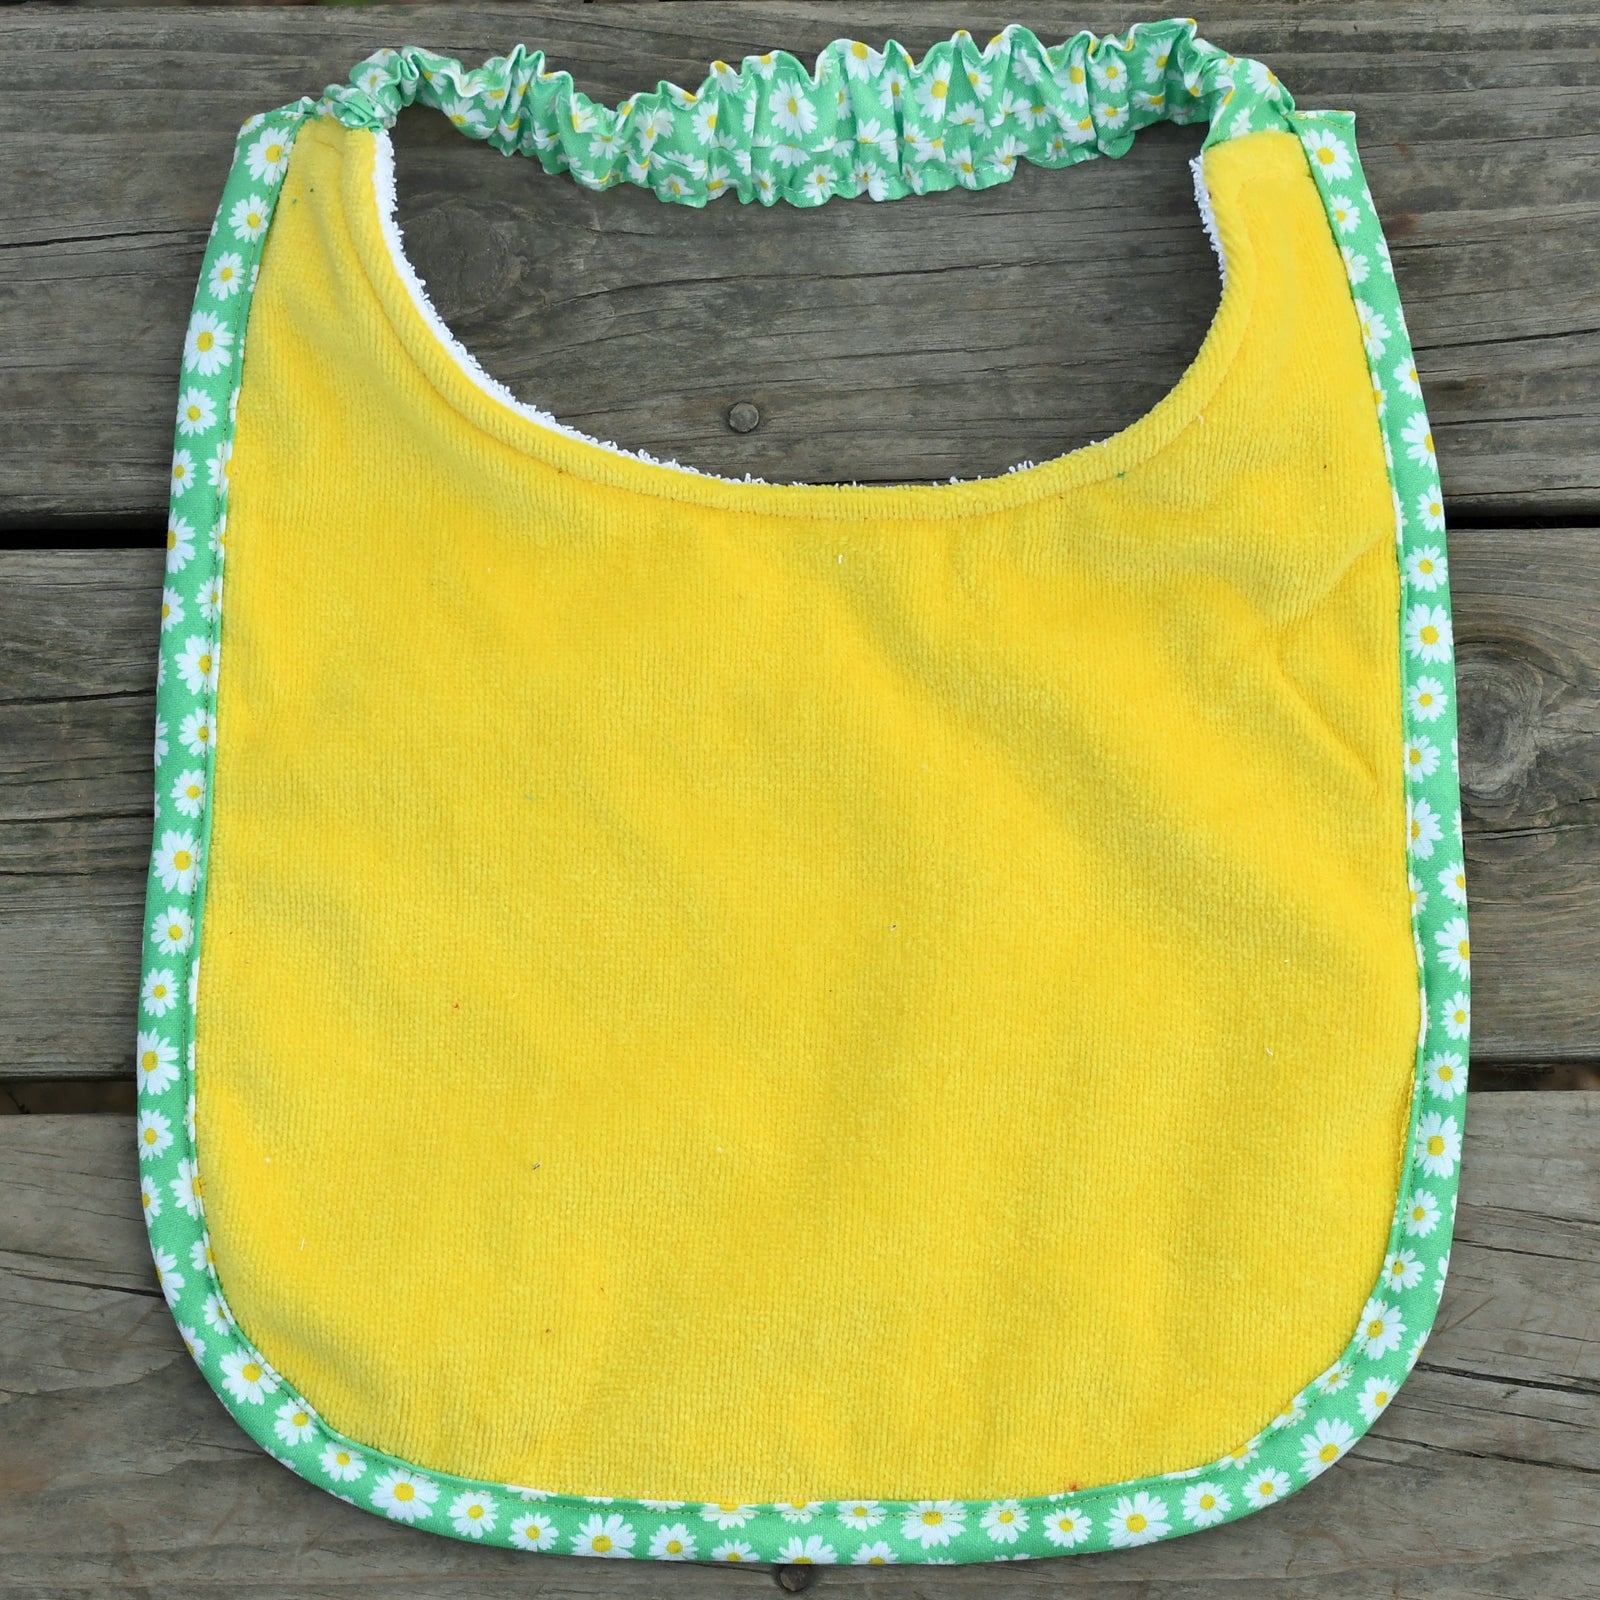 Popular Drool Bibs*(you select colors only) 3 to 6 weeks to ship